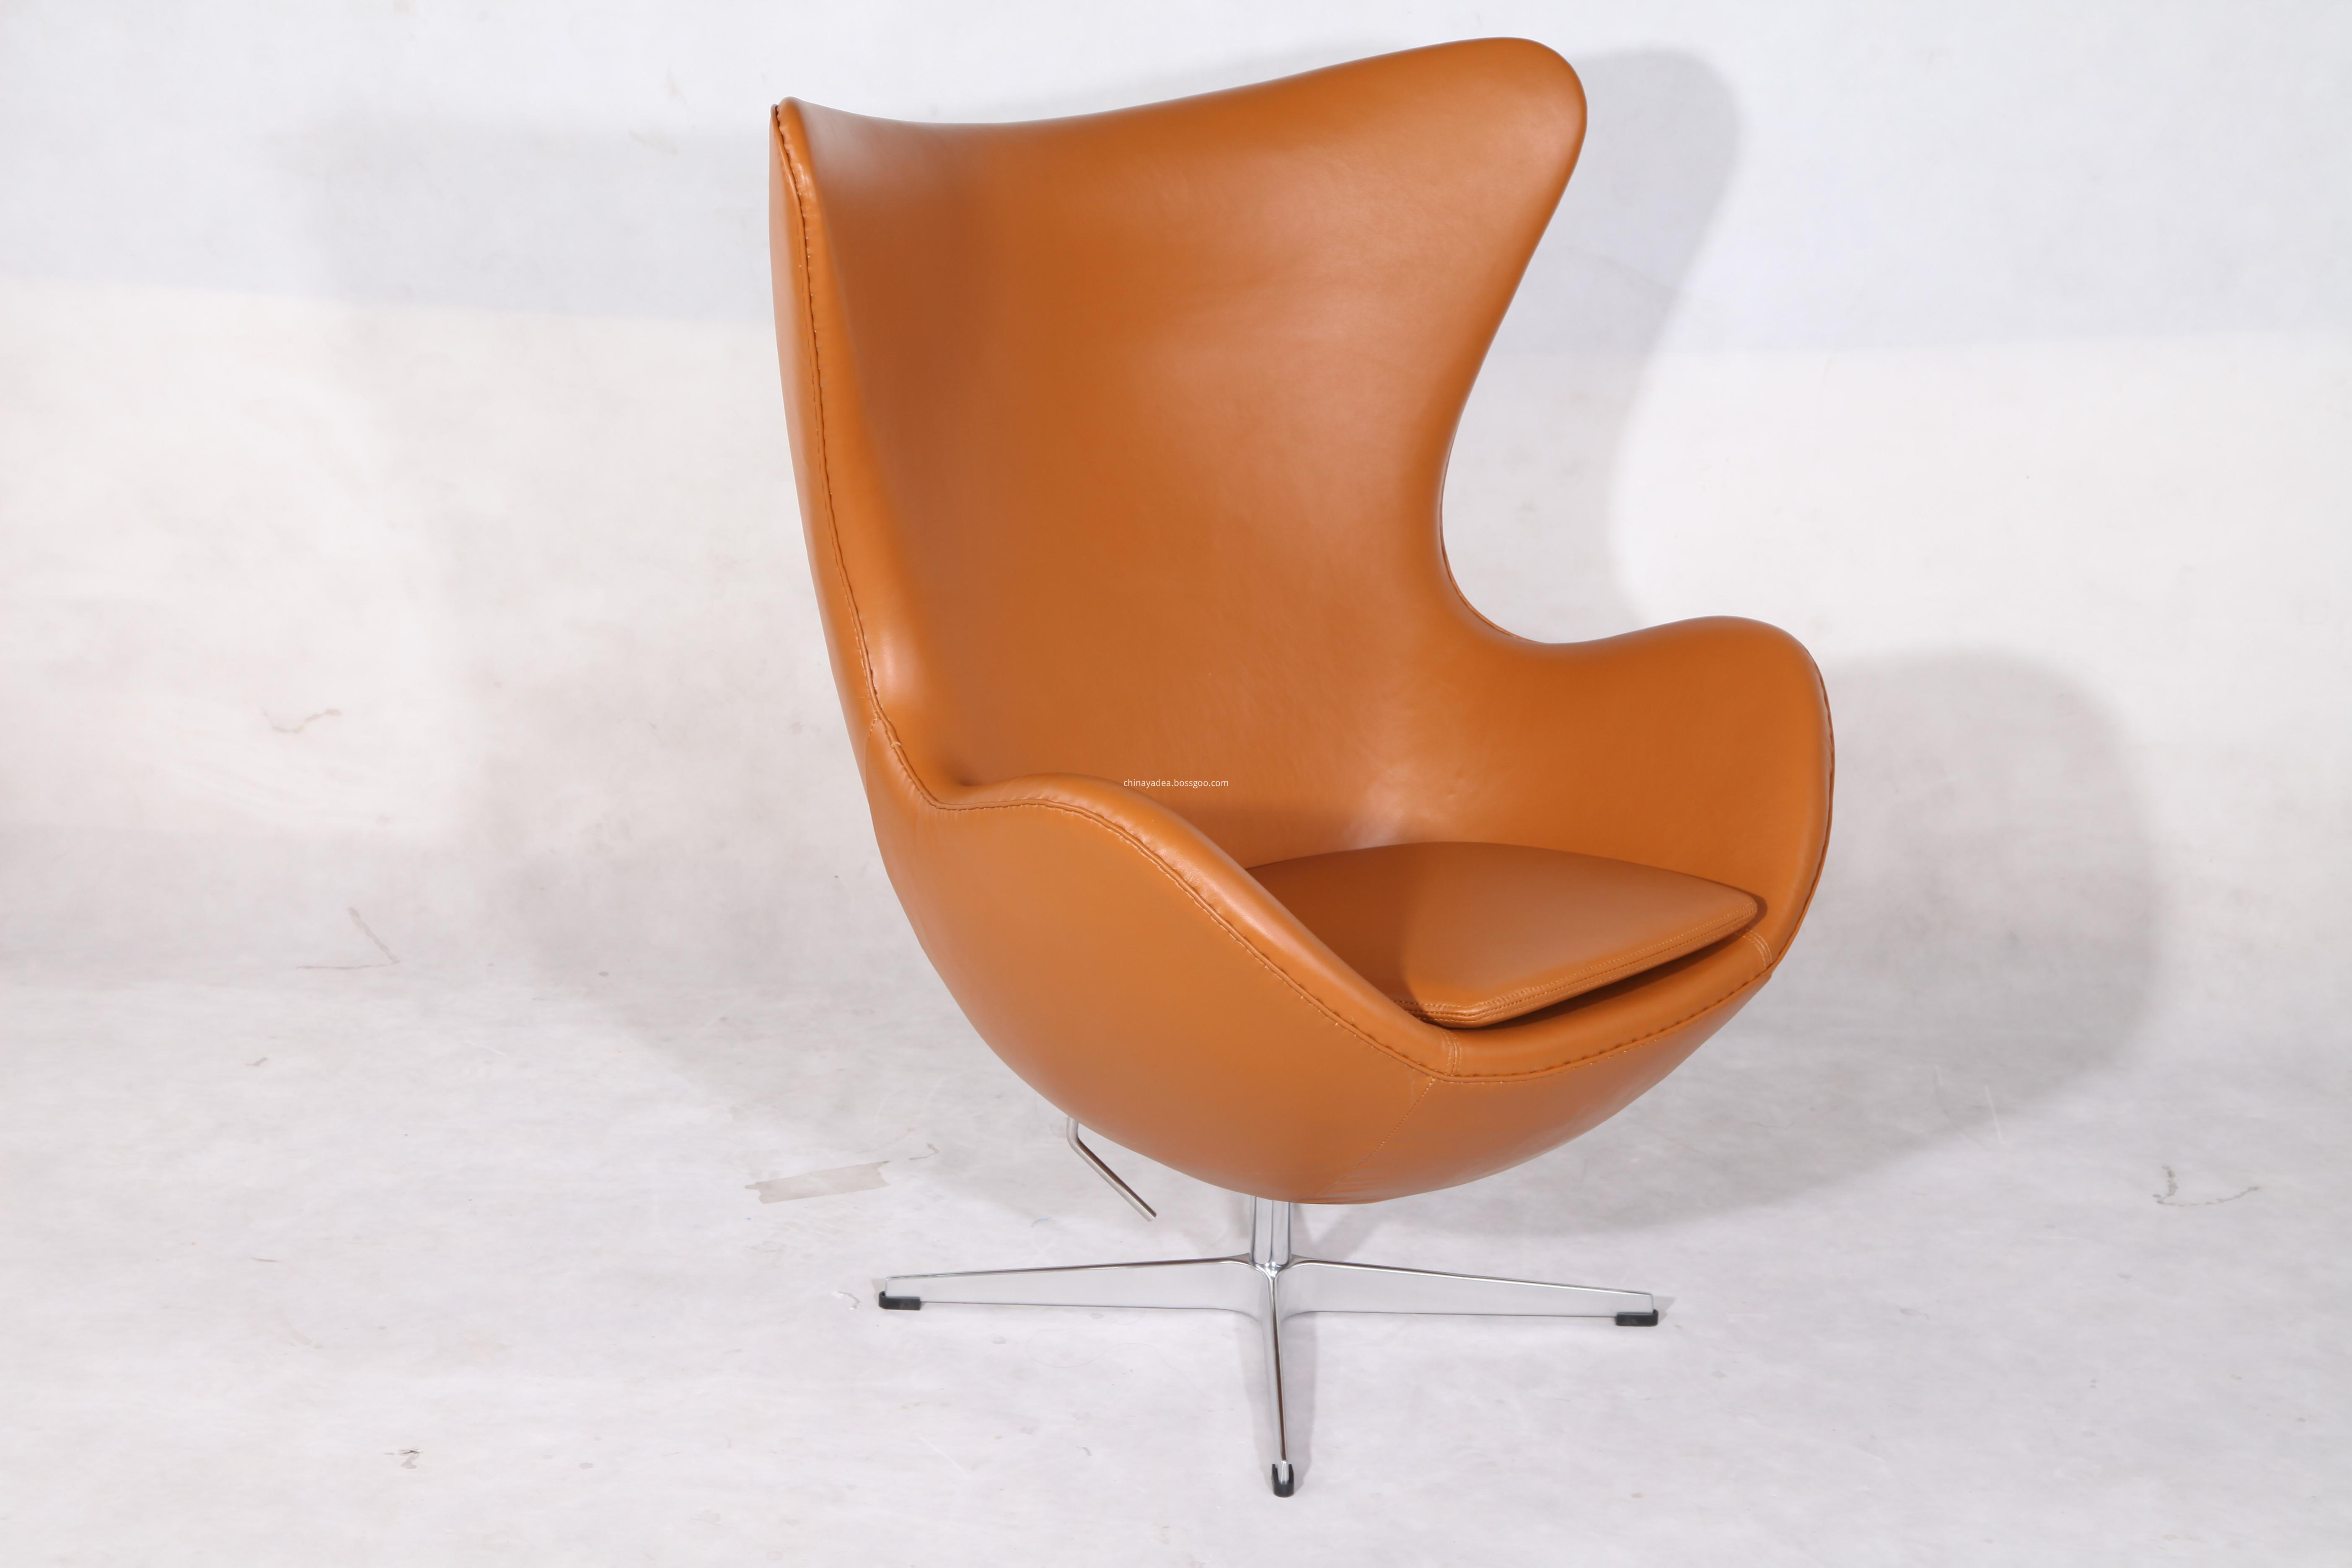 egg chair cognac leather reproduction